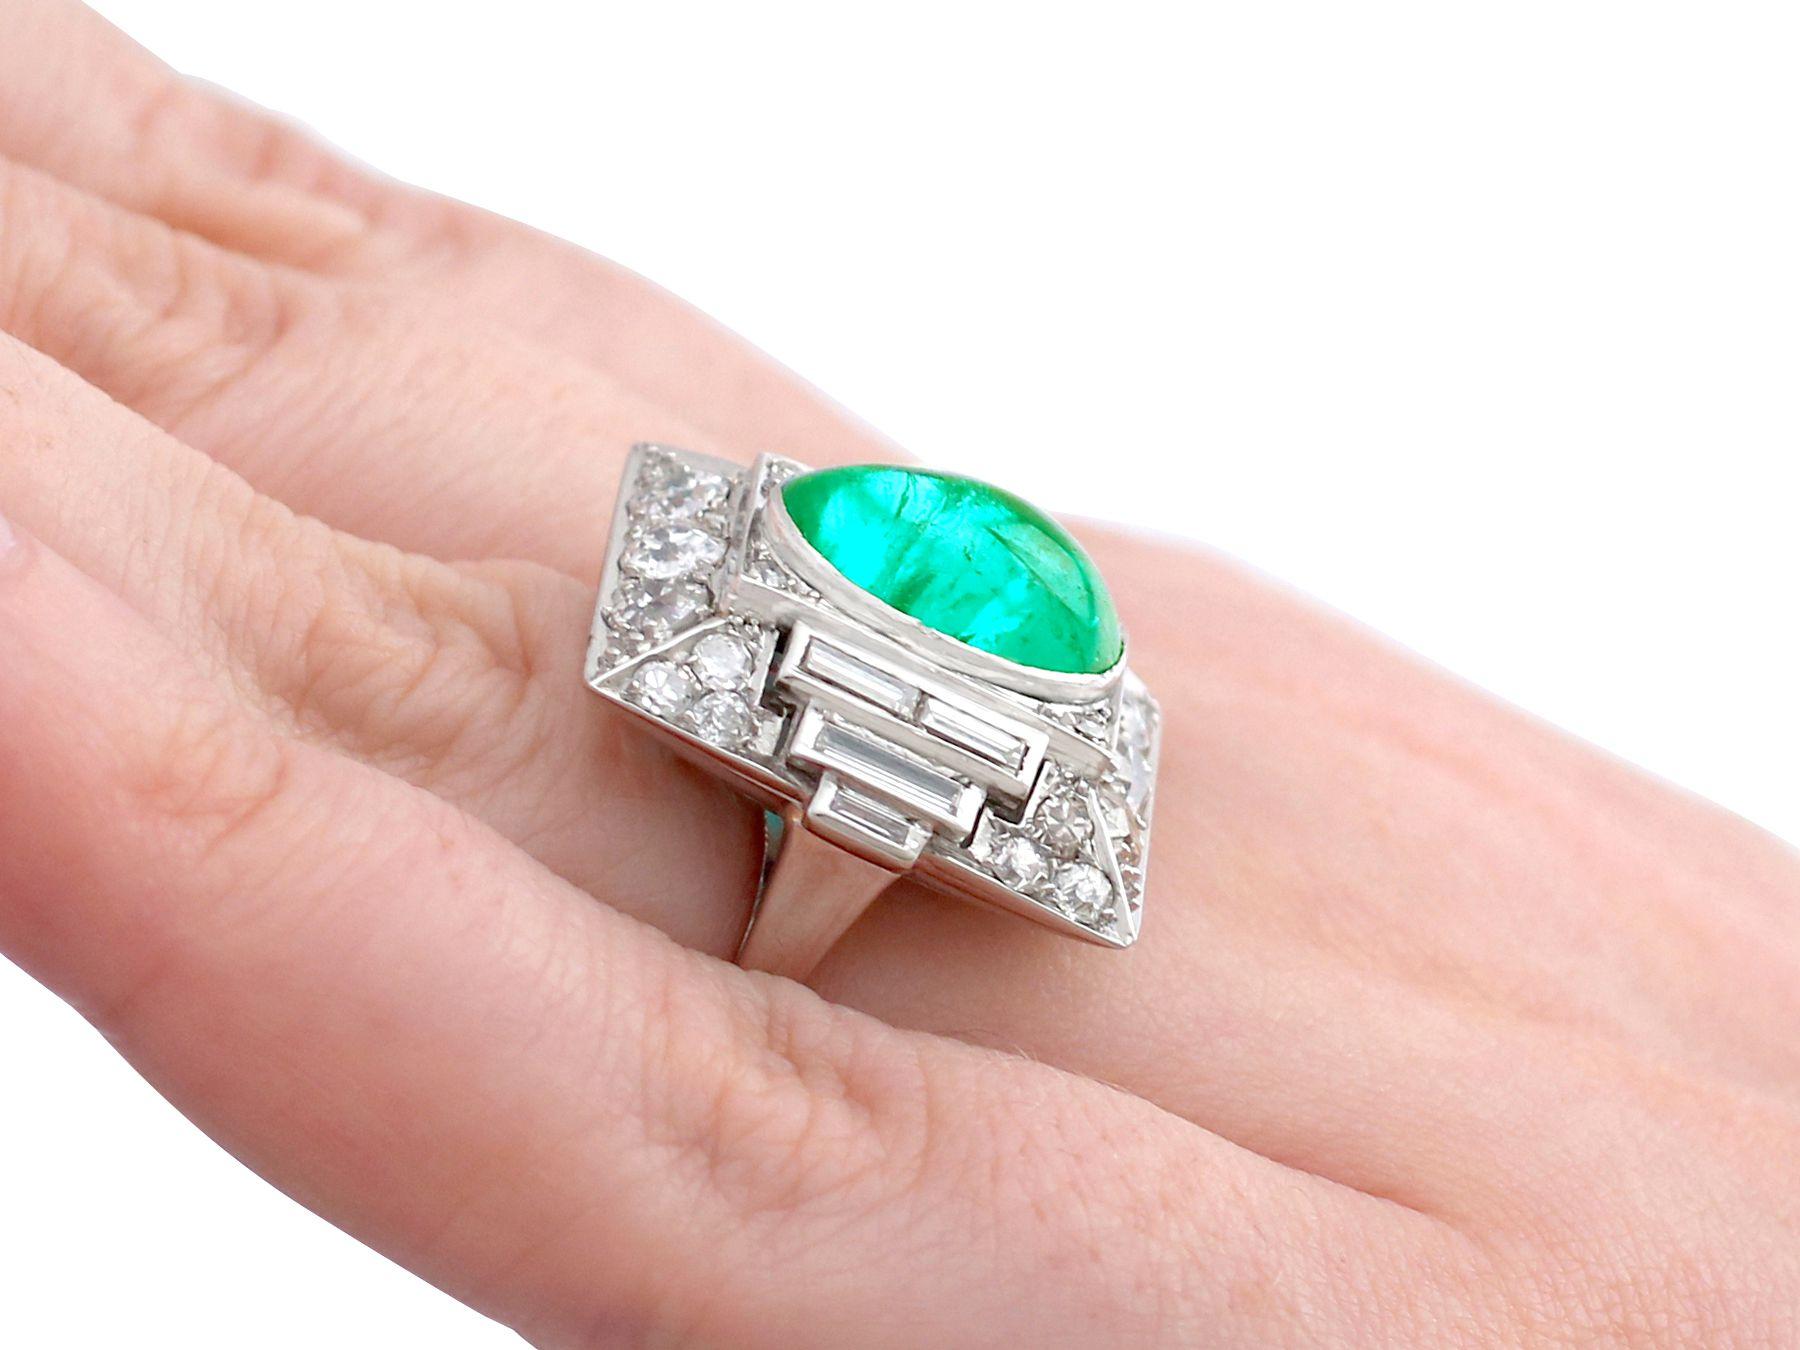 1935 Antique 3.40ct Cabochon Cut Emerald and 2.72ct Diamond Cocktail Ring For Sale 2